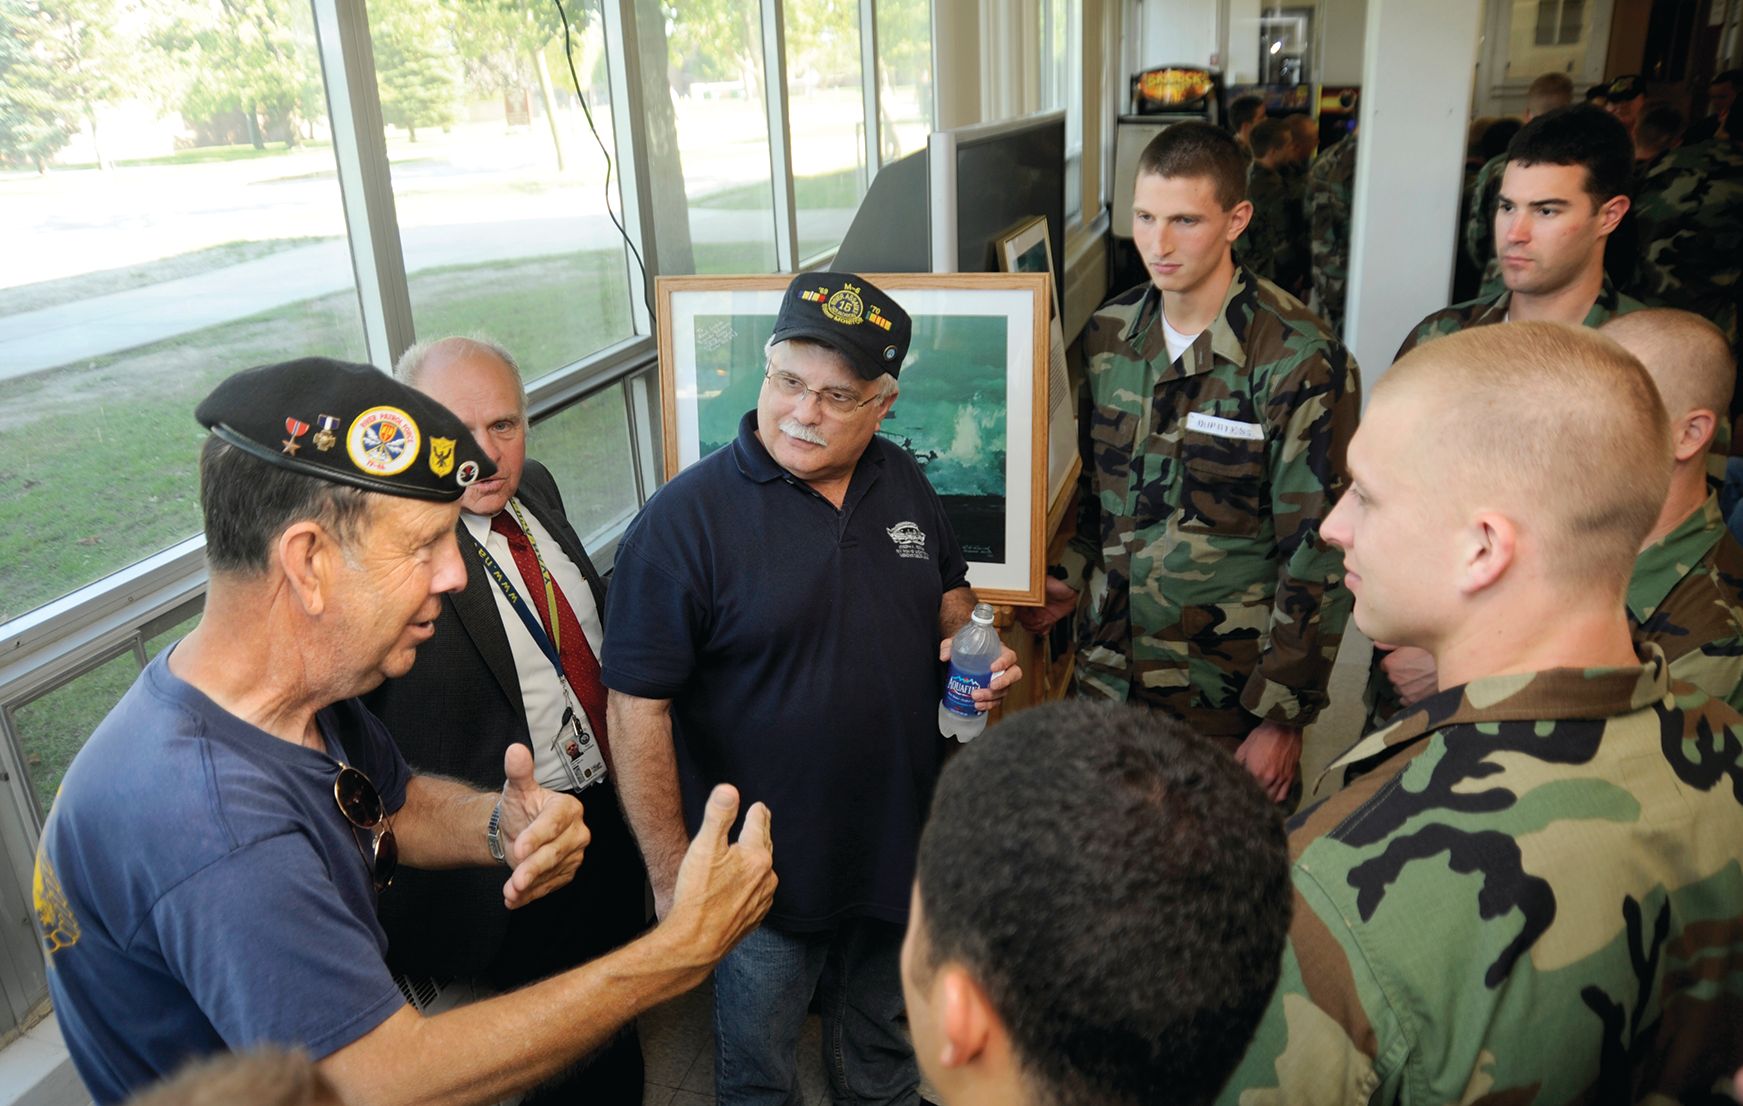 David Larsen, left, a recipient of the Navy Cross for actions in Vietnam, and Joe Rosner, center, both with the Mobile Riverine Force in Vietnam, speak with U.S. Sailors attending the Naval Special Warfare Preparatory School at Naval Station Great Lakes, Illinois, September 2, 2011. 